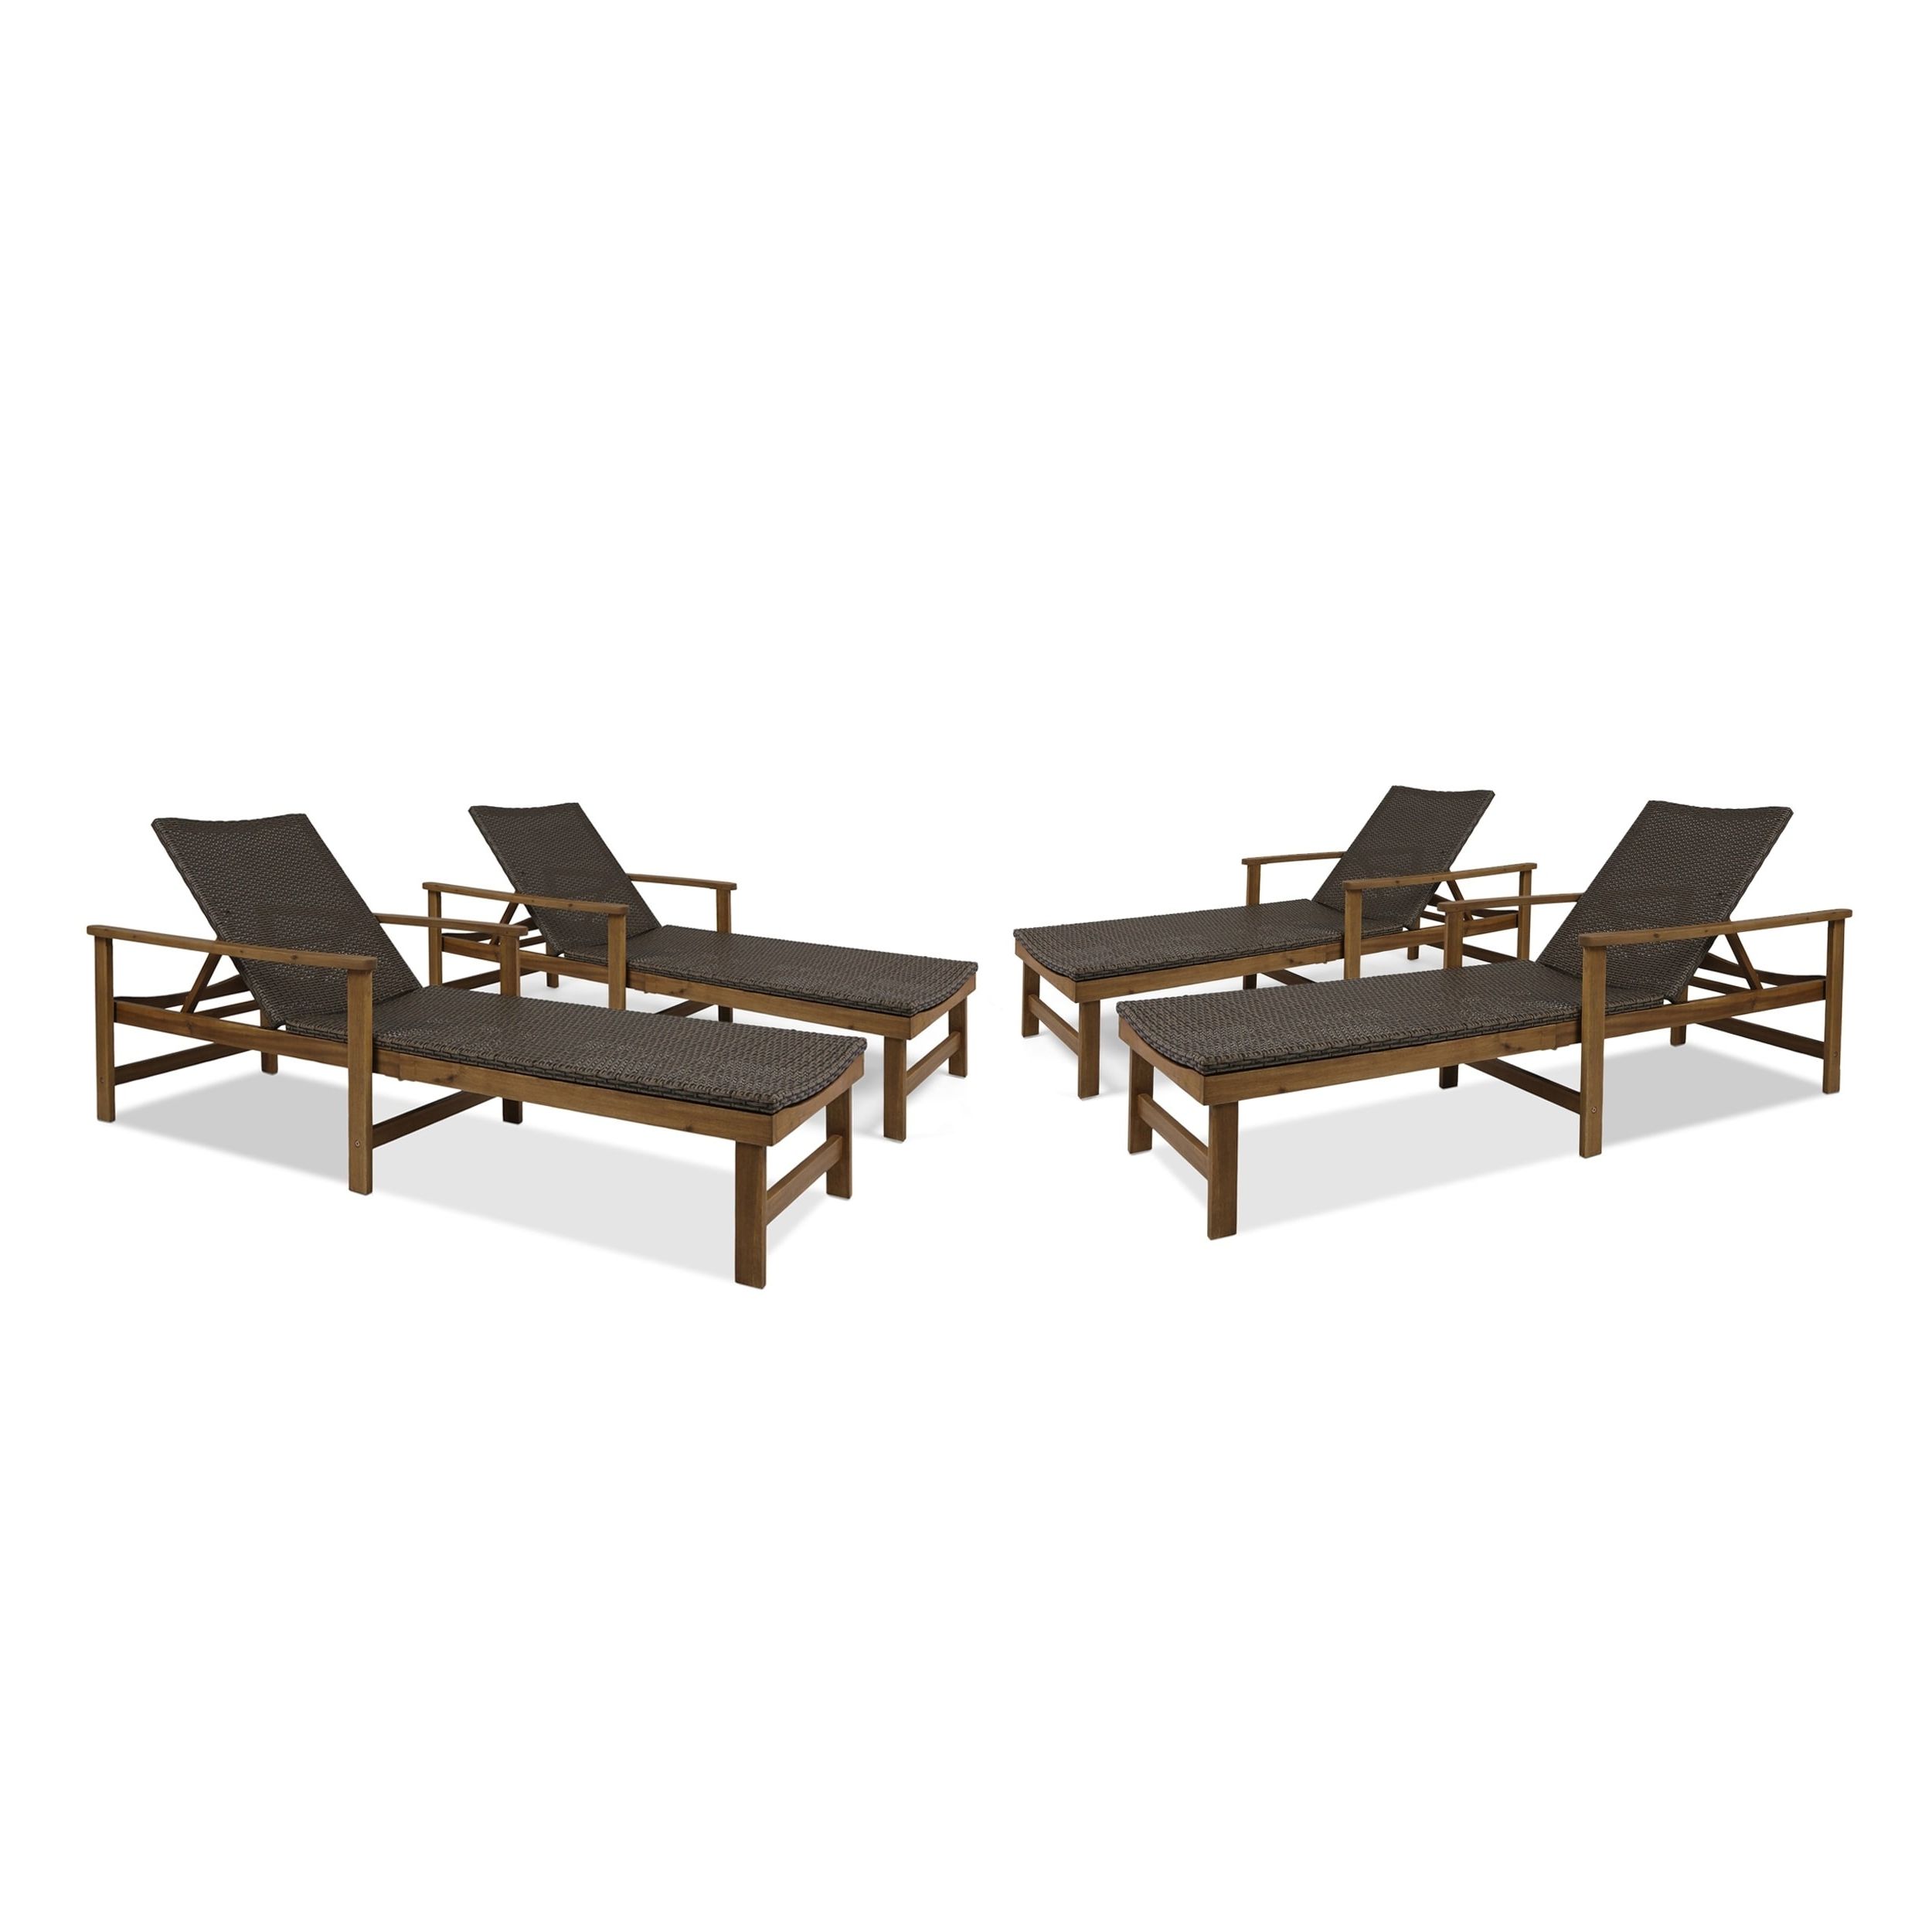 Christopher Knight Home Hampton Outdoor Acacia Wood And Wicker Chaise  Lounges(set Of 4) By Intended For Fashionable Hampton Outdoor Chaise Lounges Acacia Wood And Wicker (View 8 of 25)